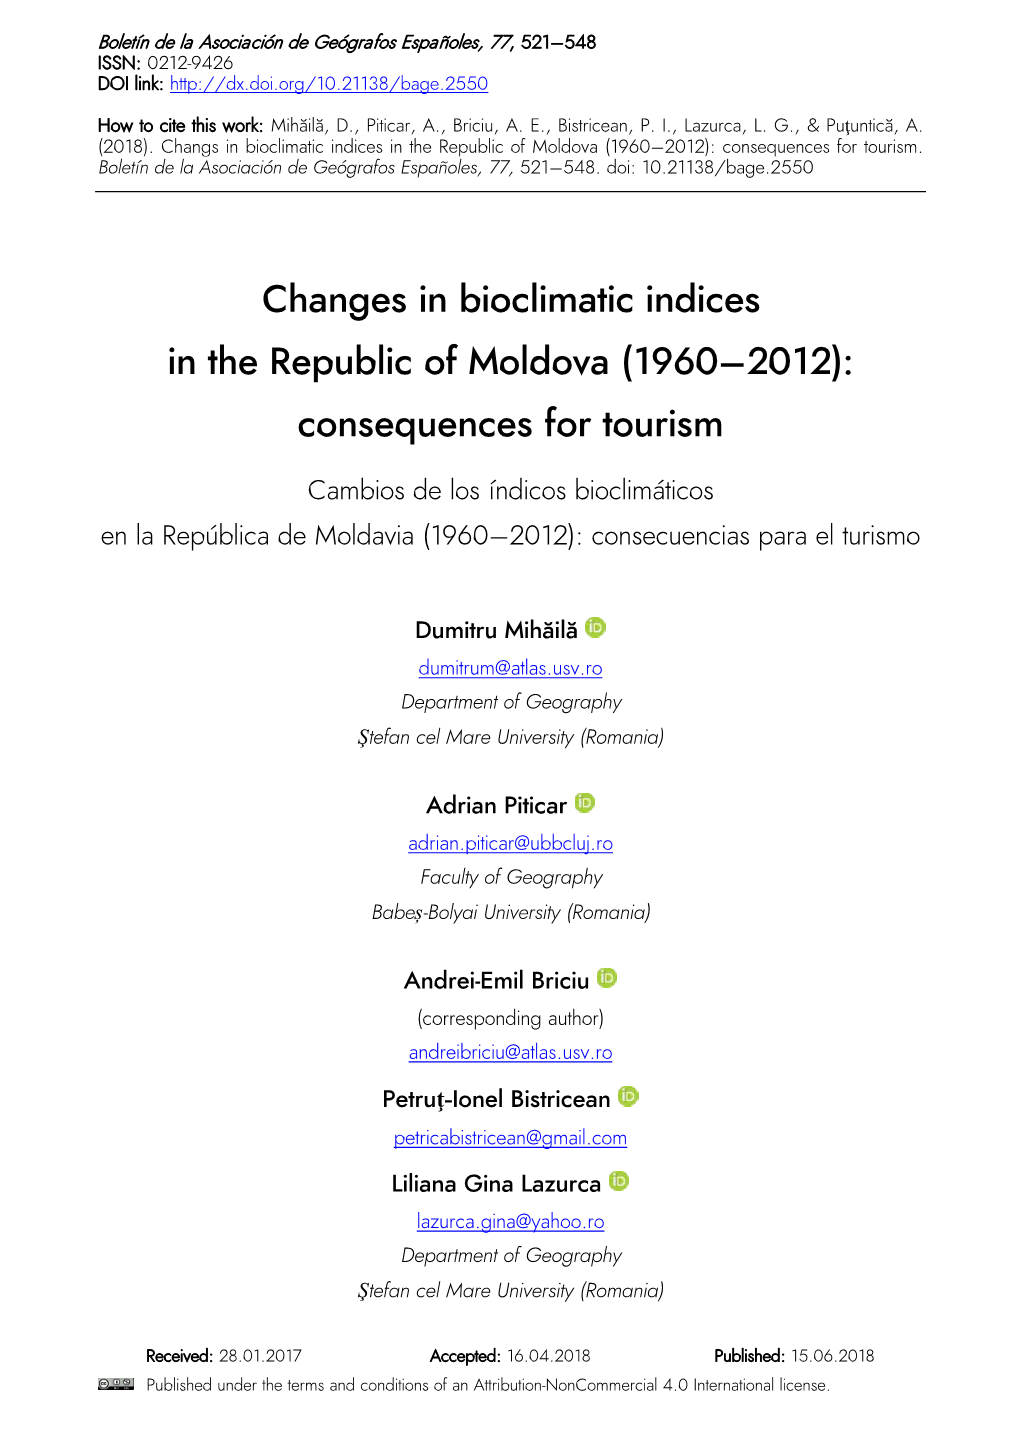 Changes in Bioclimatic Indices in the Republic of Moldova (1960–2012): Consequences for Tourism